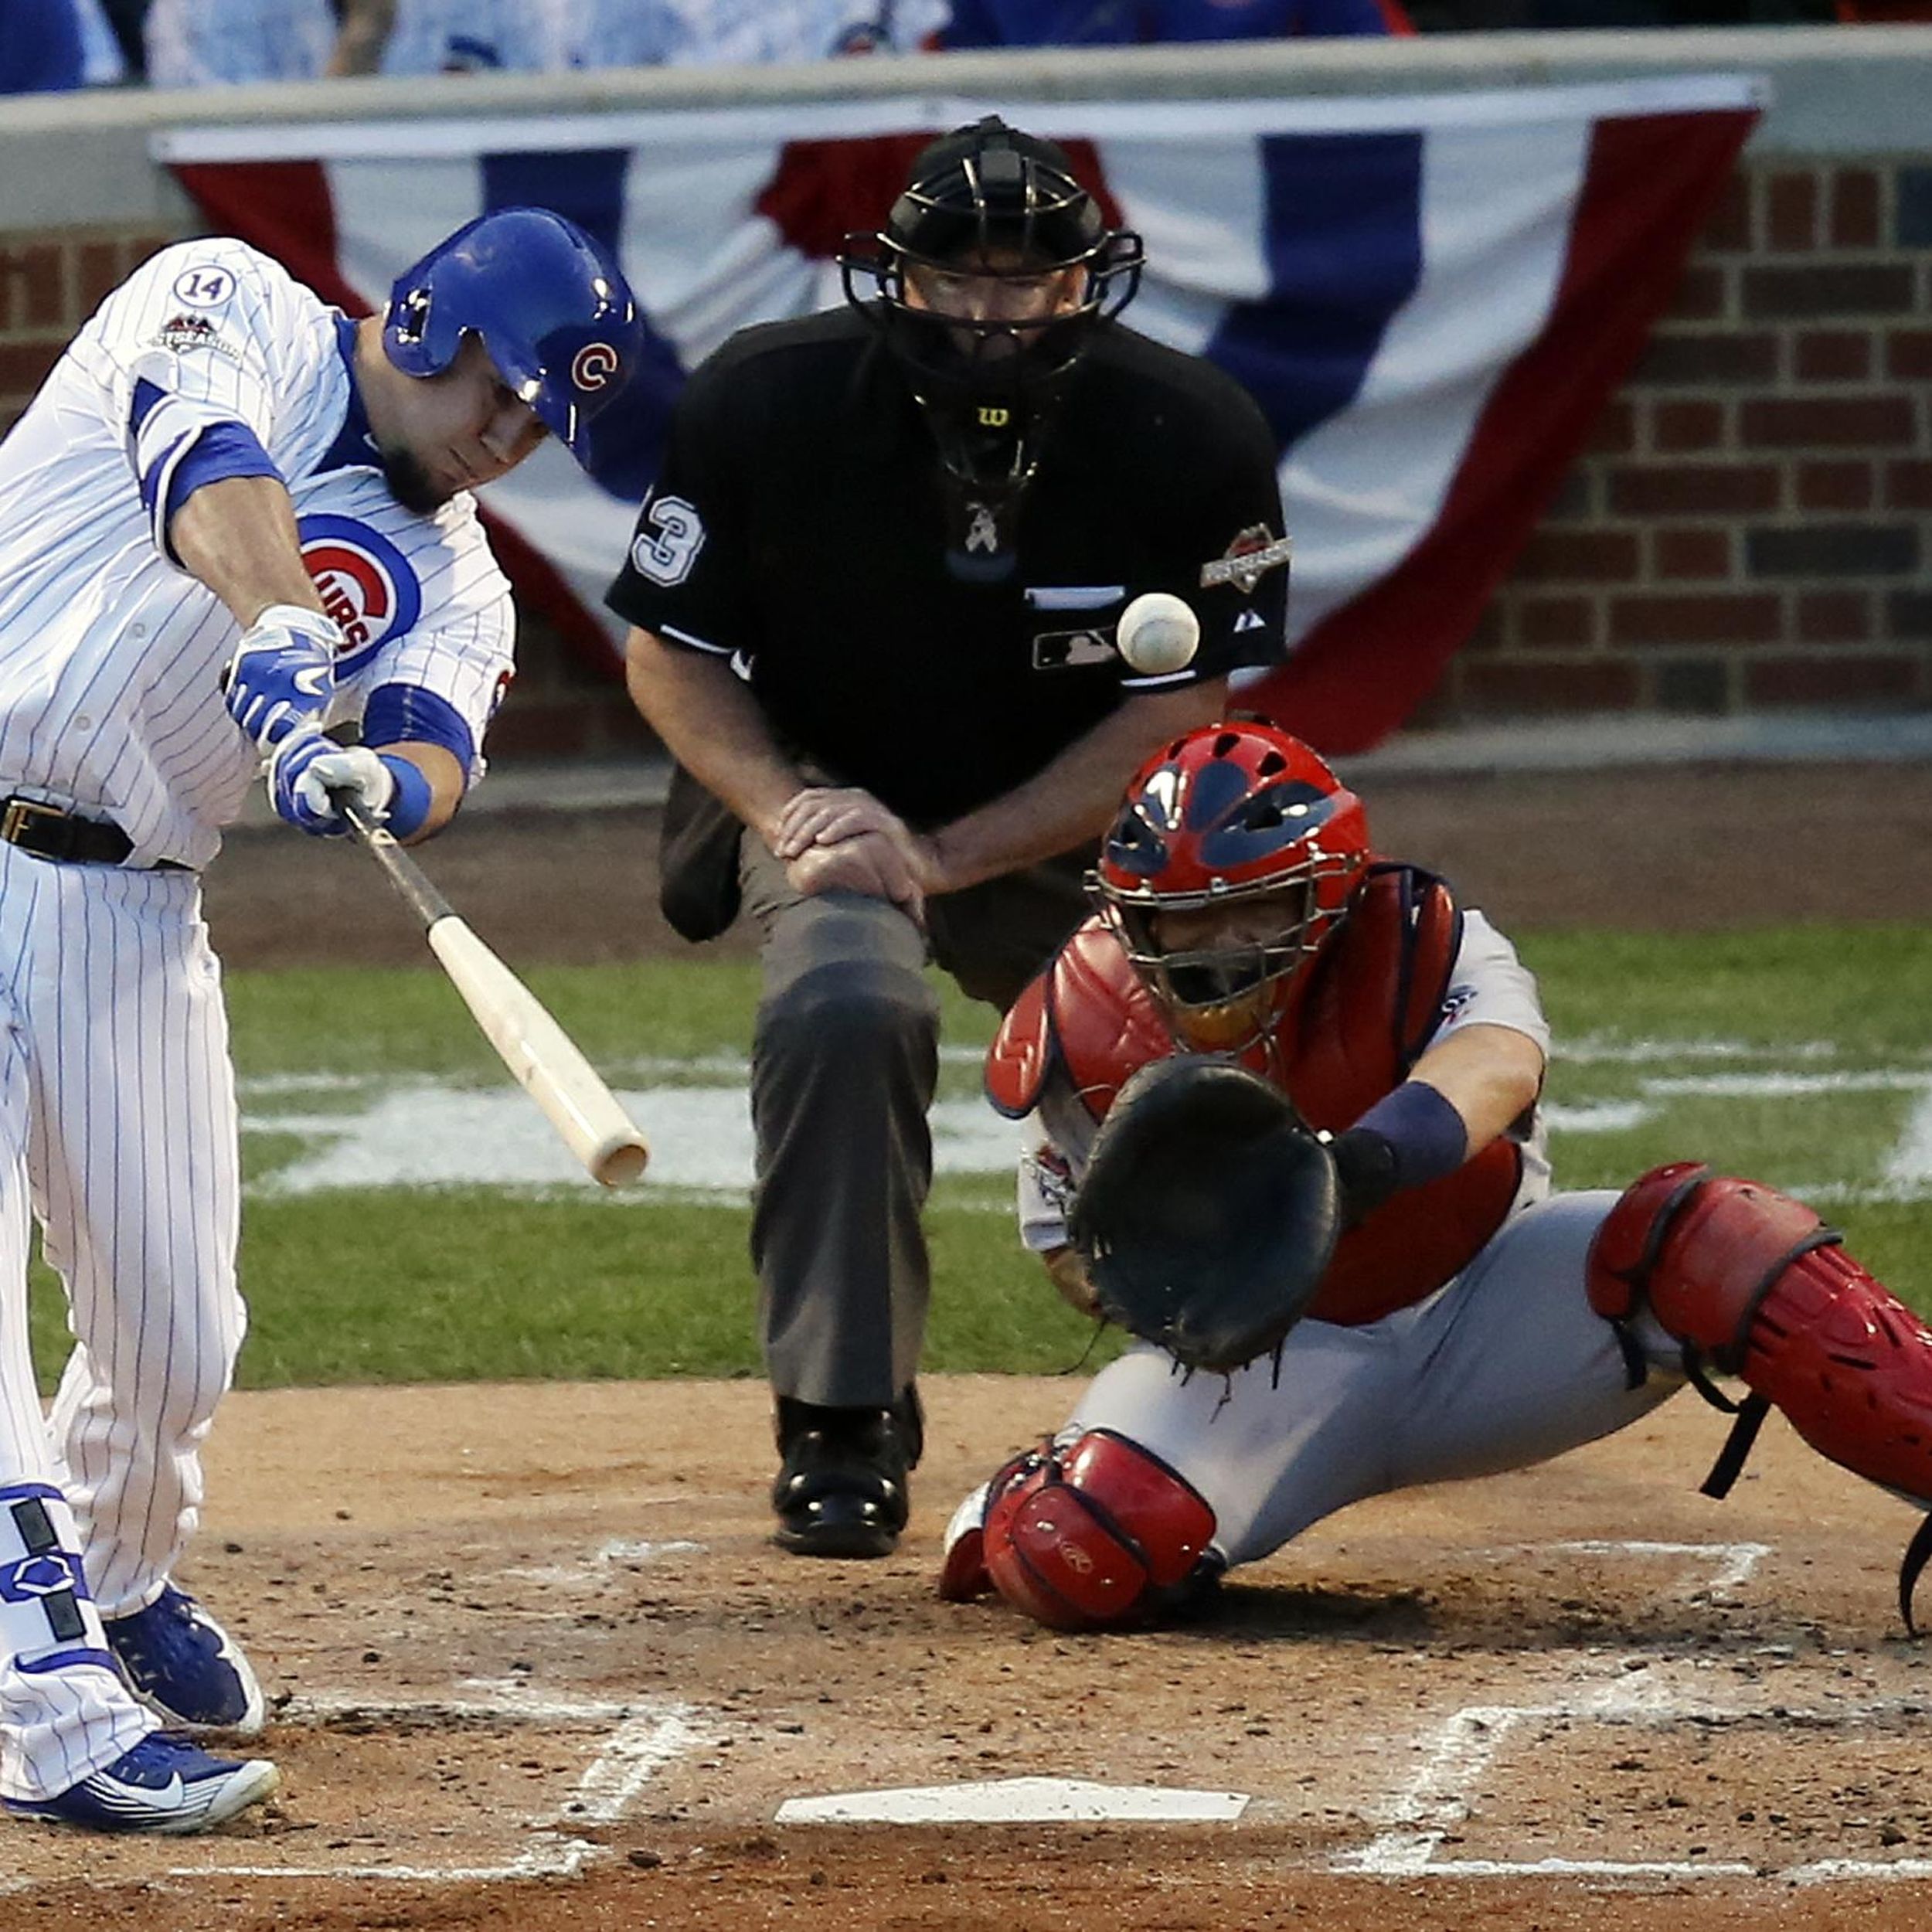 Chicago Cubs Jorge Soler swings, hitting a two run home run in the